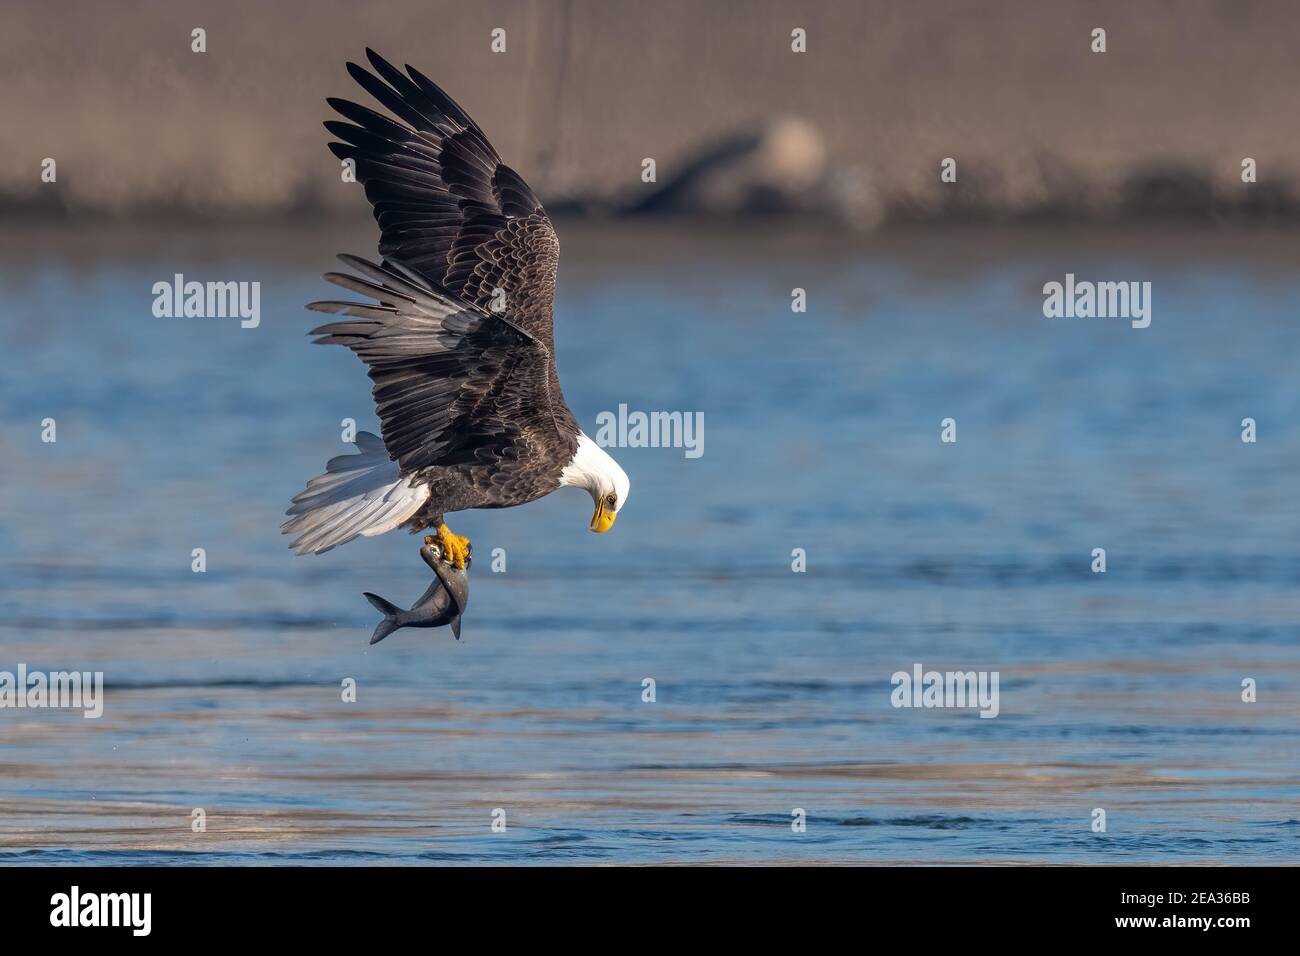 American bald eagle swooping down to grab a fish in conowingo dam Stock Photo